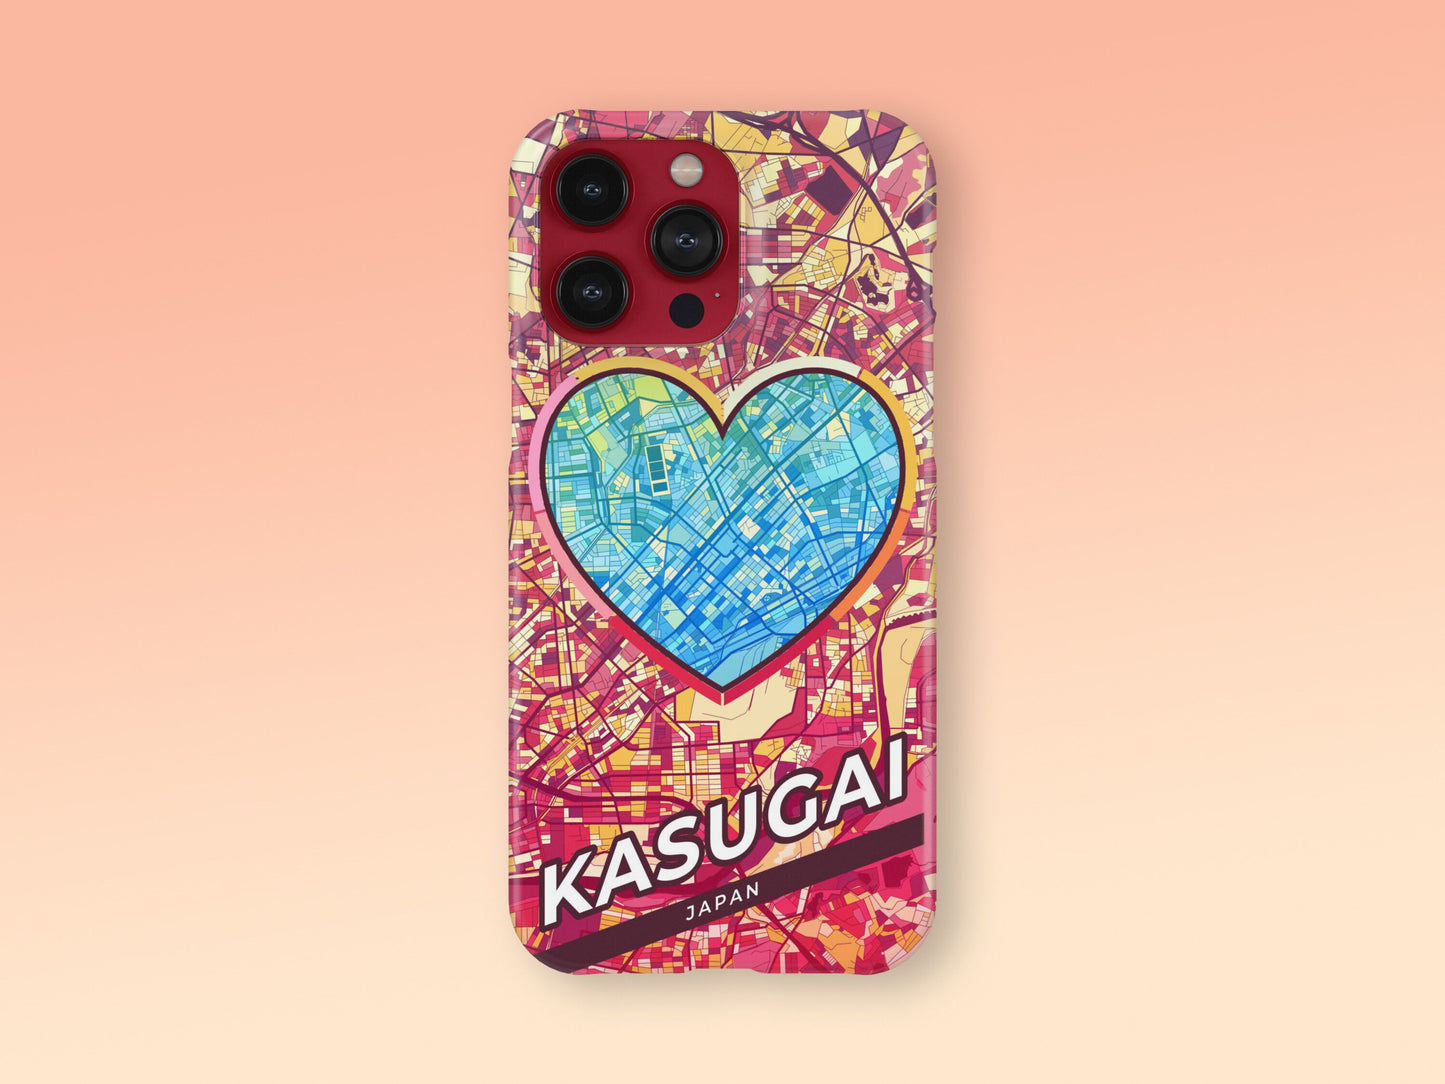 Kasugai Japan slim phone case with colorful icon. Birthday, wedding or housewarming gift. Couple match cases. 2